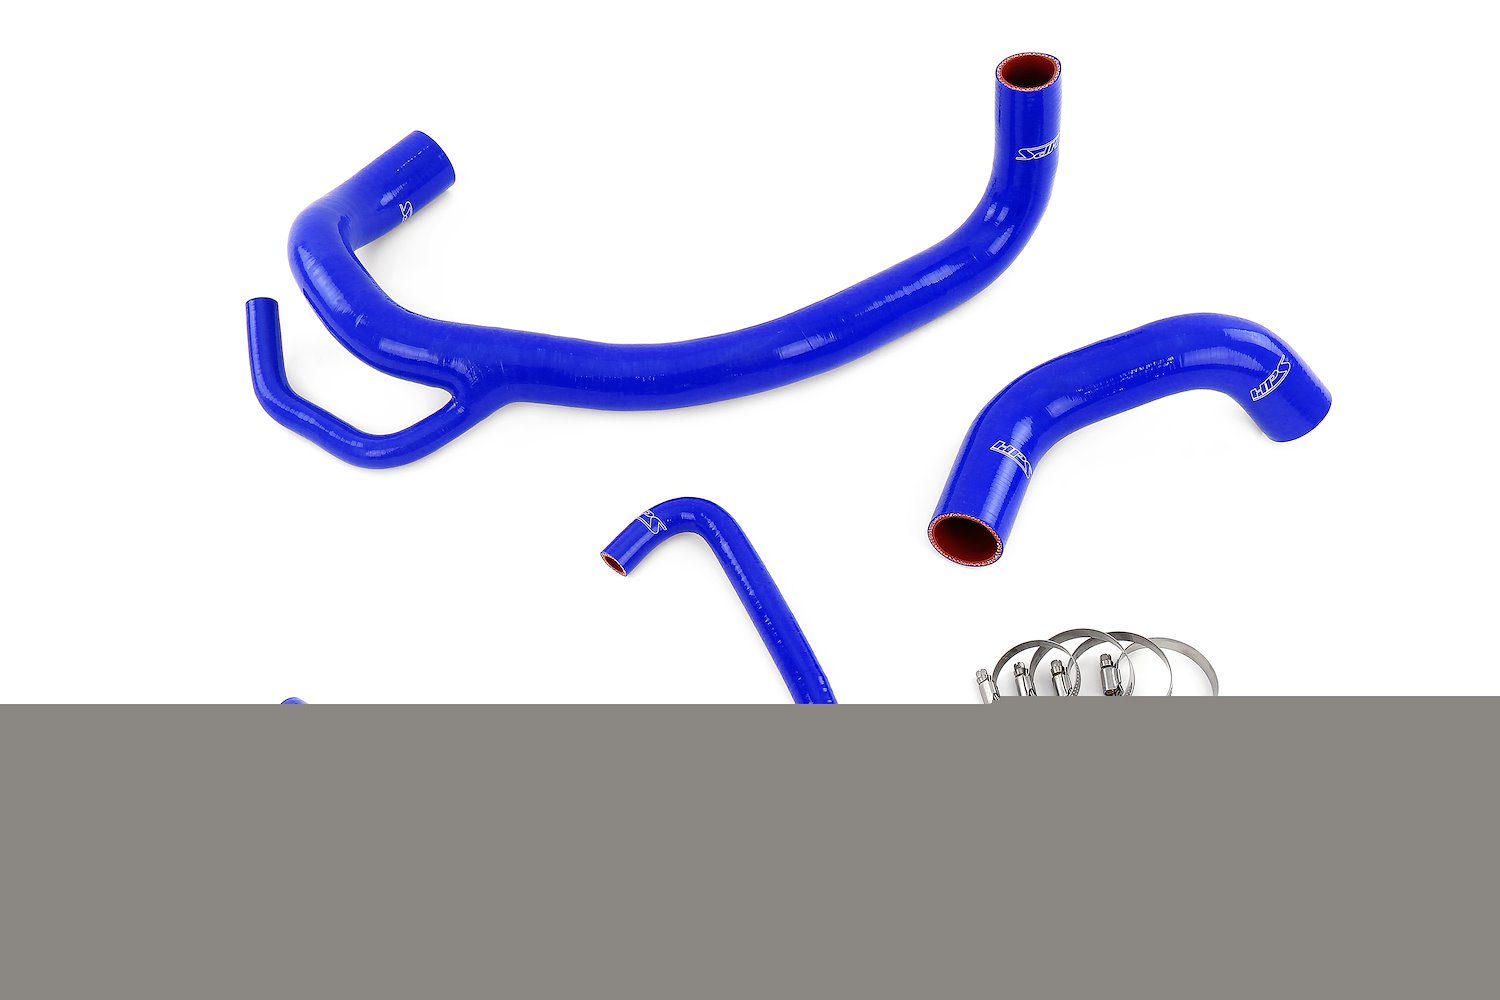 57-1616R-BLUE Radiator Hose Kit, High-Temp 3-Ply Reinforced Silicone, Replaces OEM Rubber Radiator Hoses